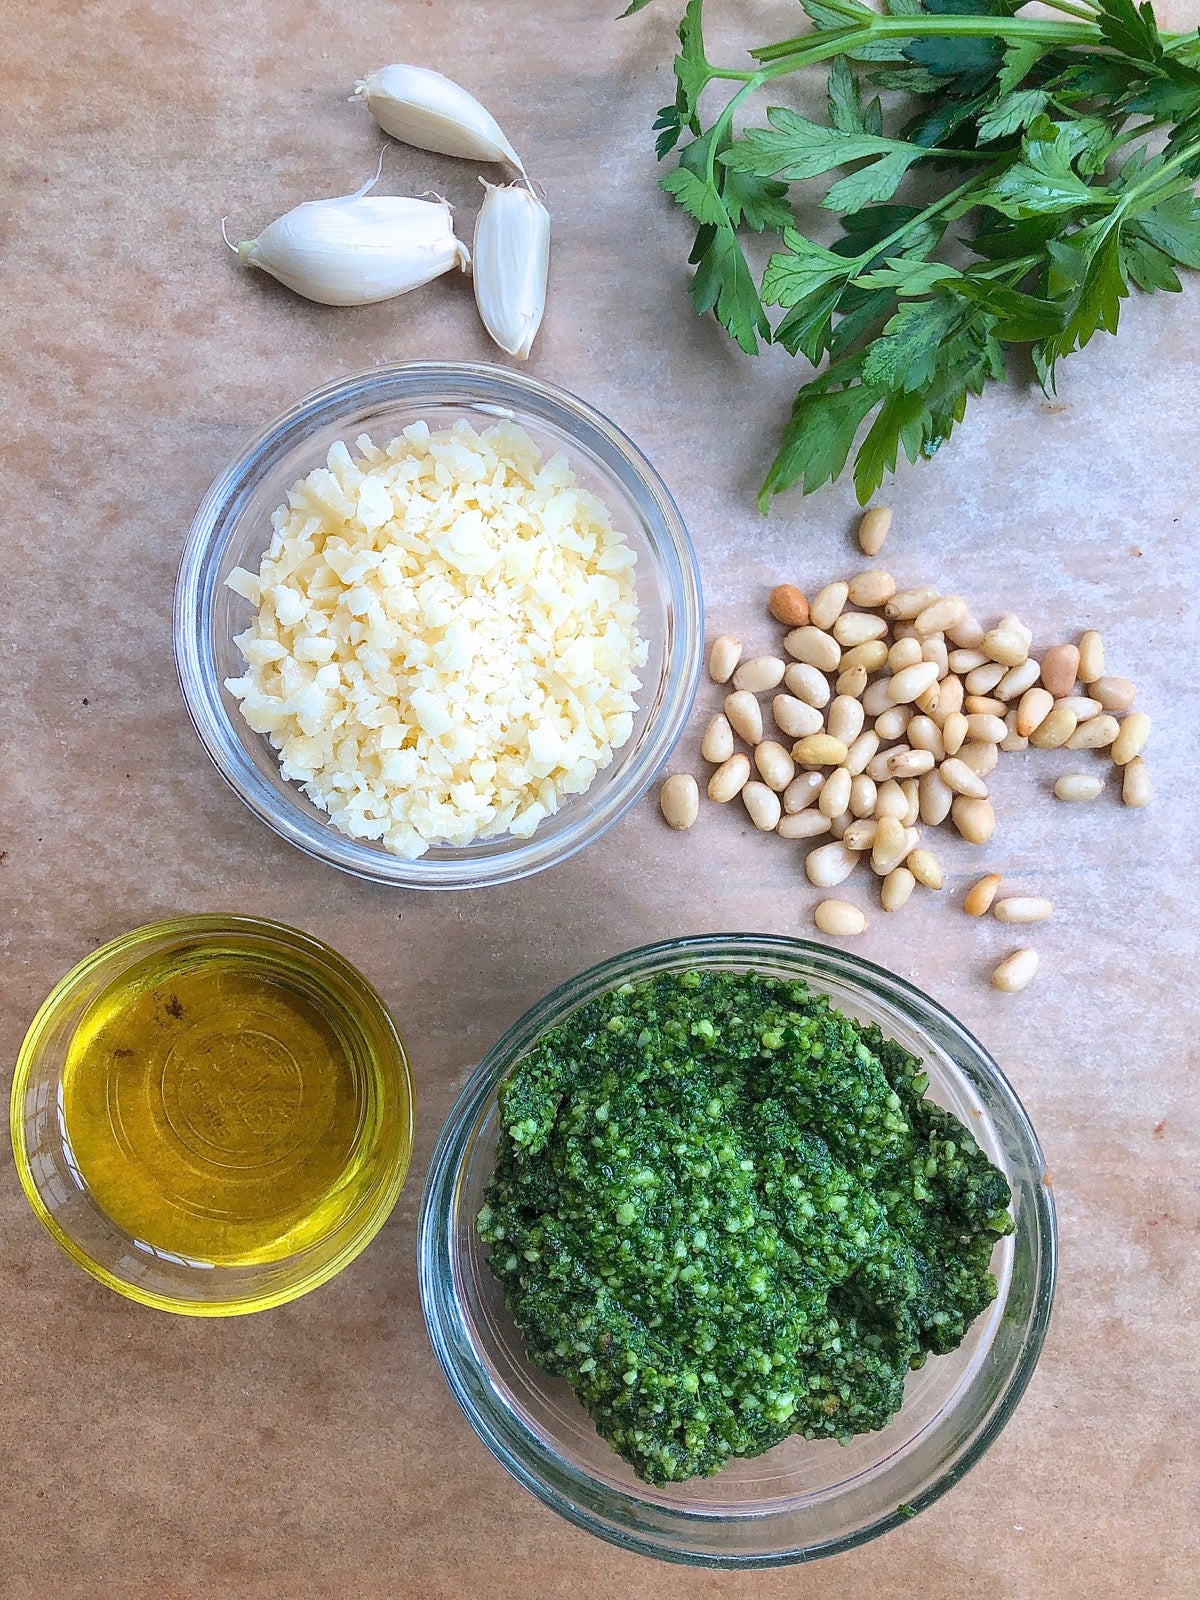 Ingredients for pesto sauce, incouding parsley, grated Parmesan, olive oil, pine  nuts, and garlic cloves